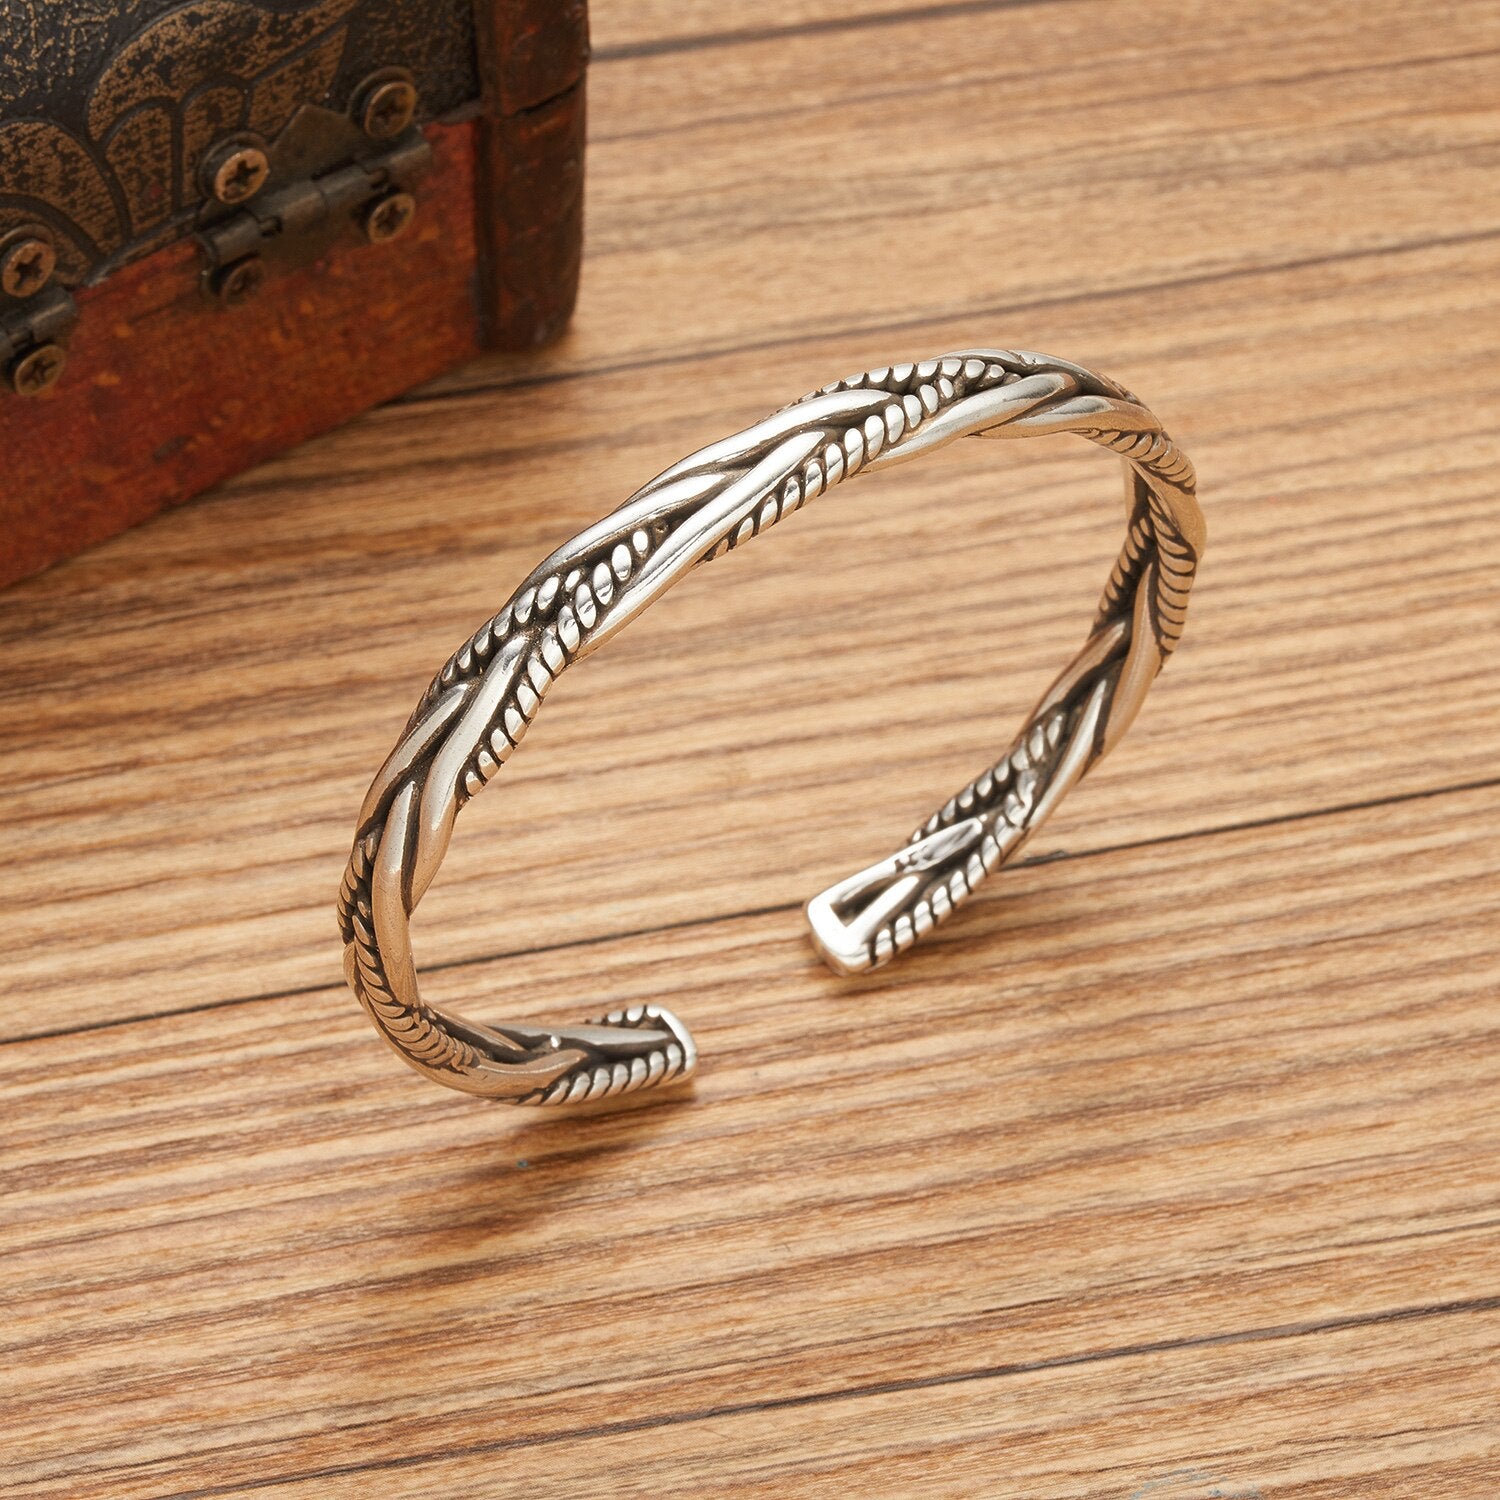 Silver Color Twisted Woven Bracelet Neutral Retro Handmade Exquisite Unique Opening Bracelet Simple Punk Wristband Jewelry Gifts